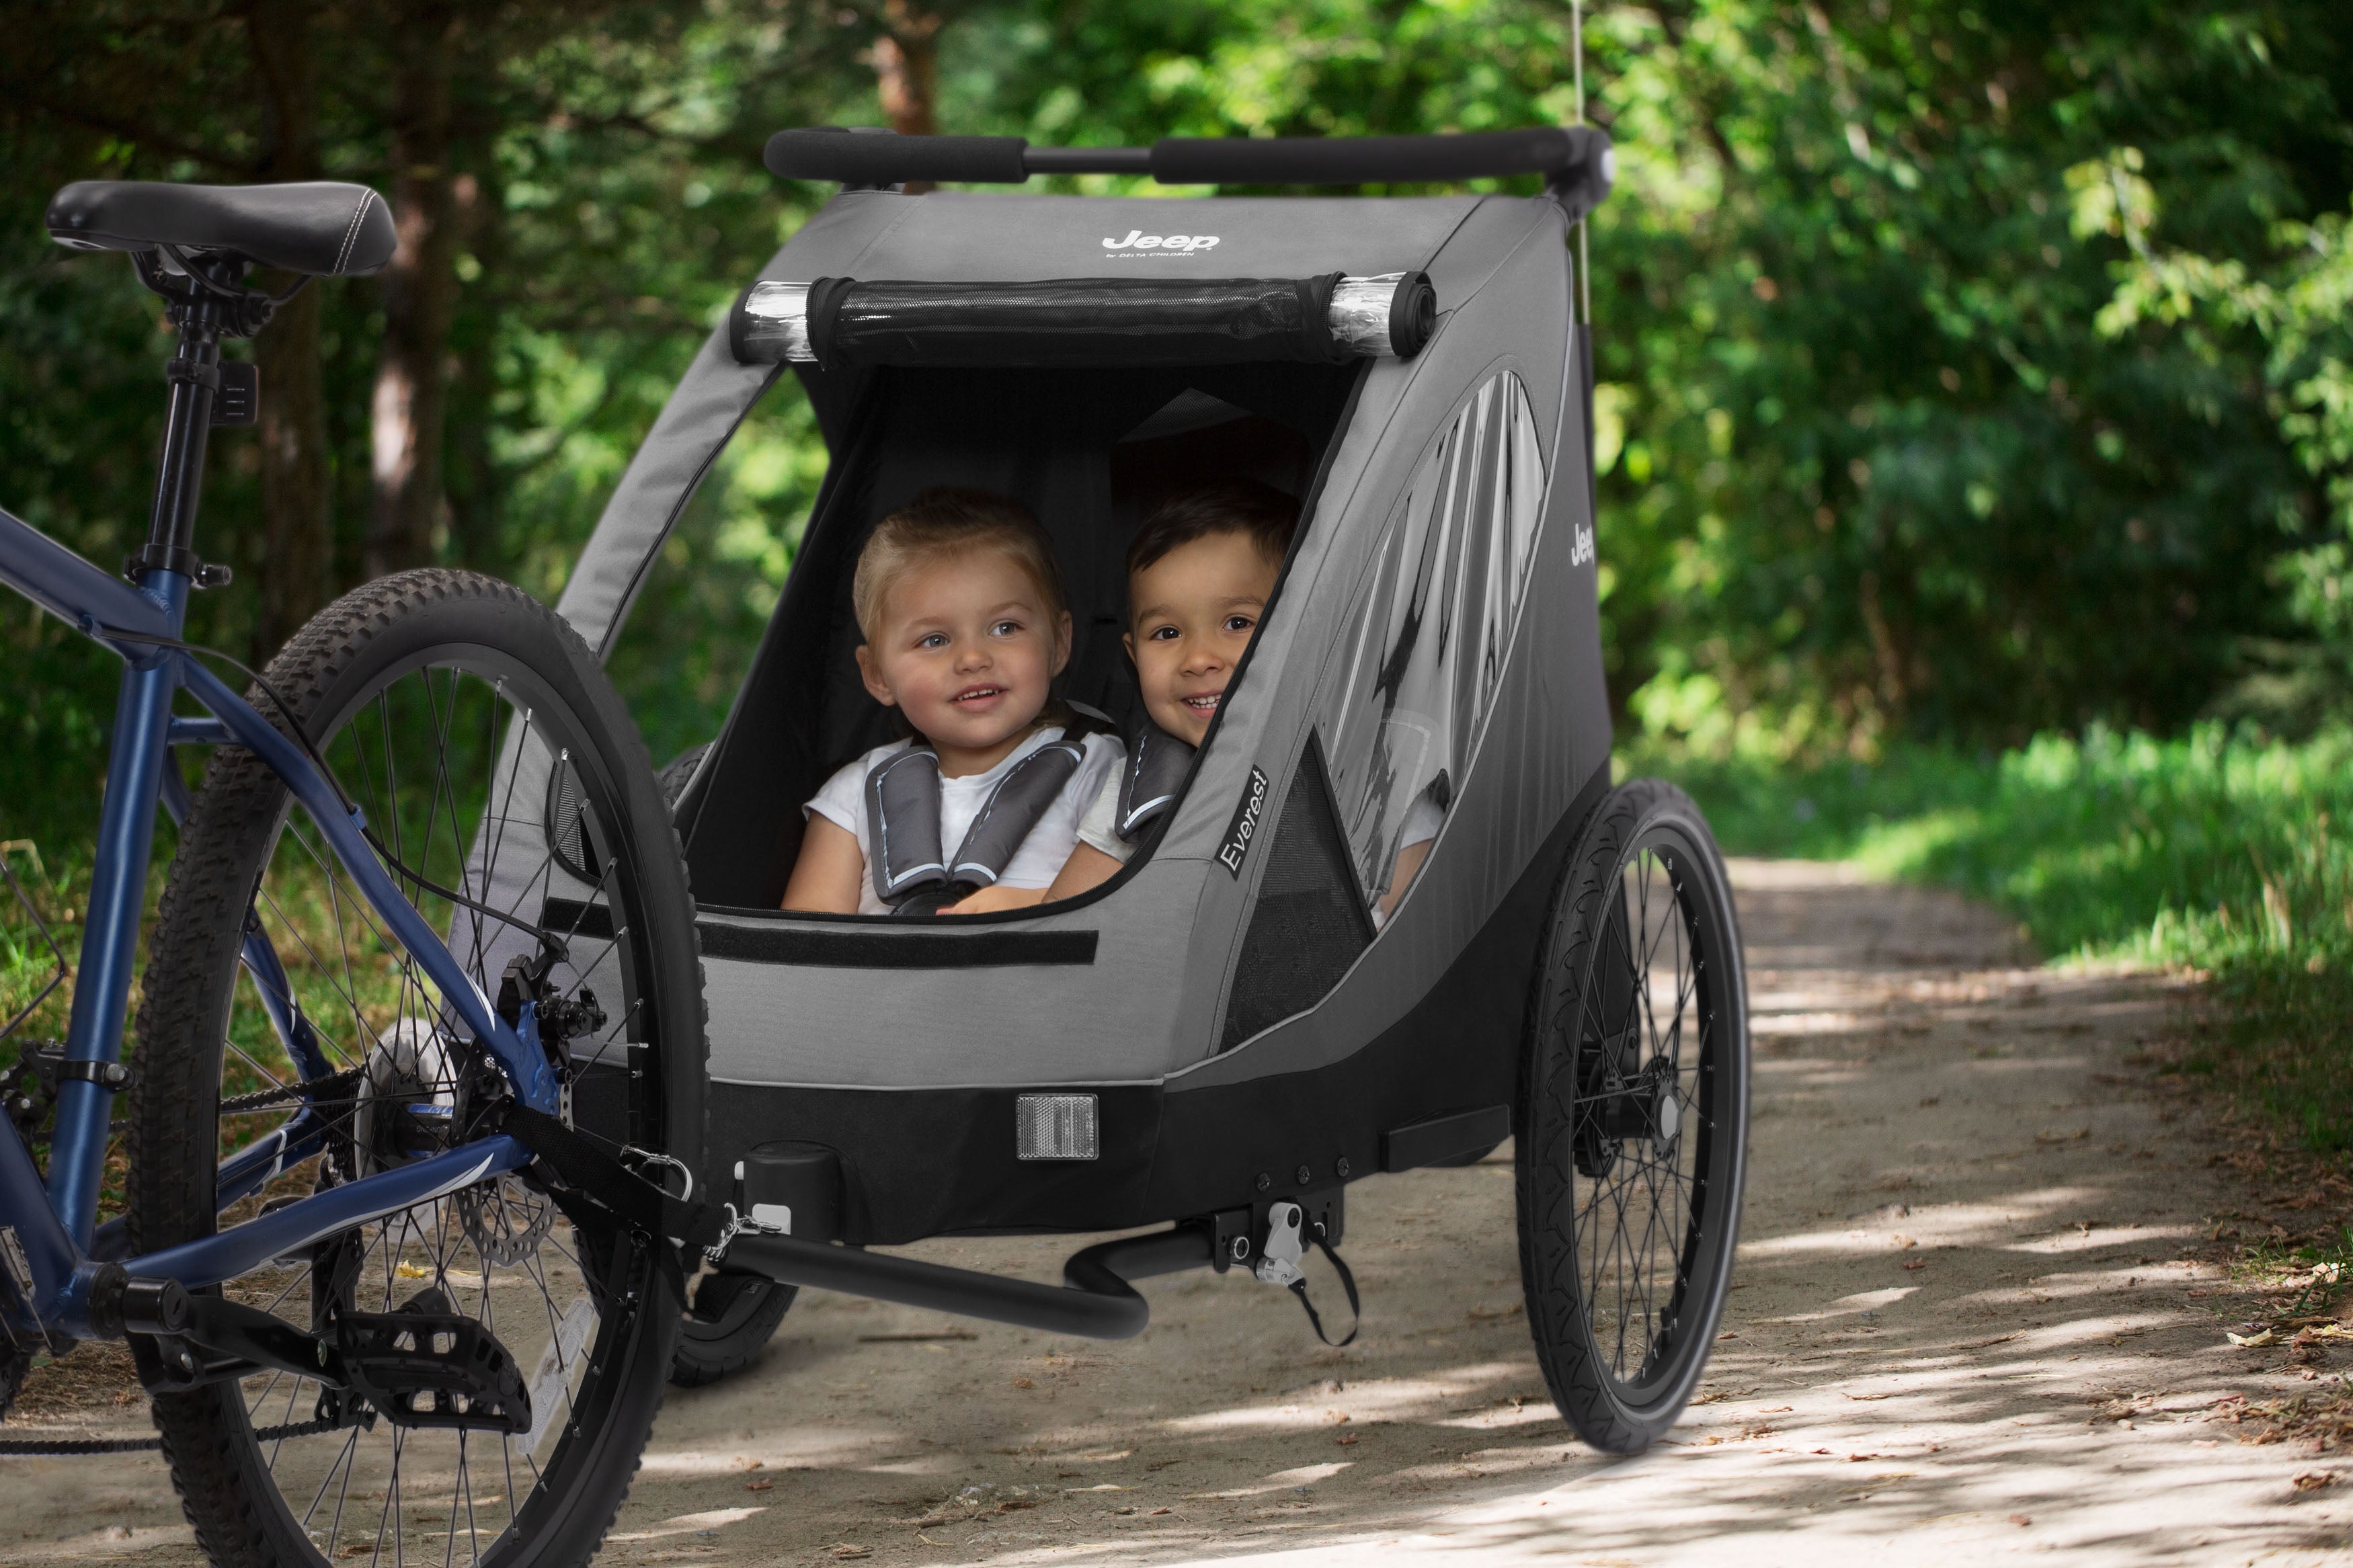 Our first season with a bike trailer for children: the Croozer Kid